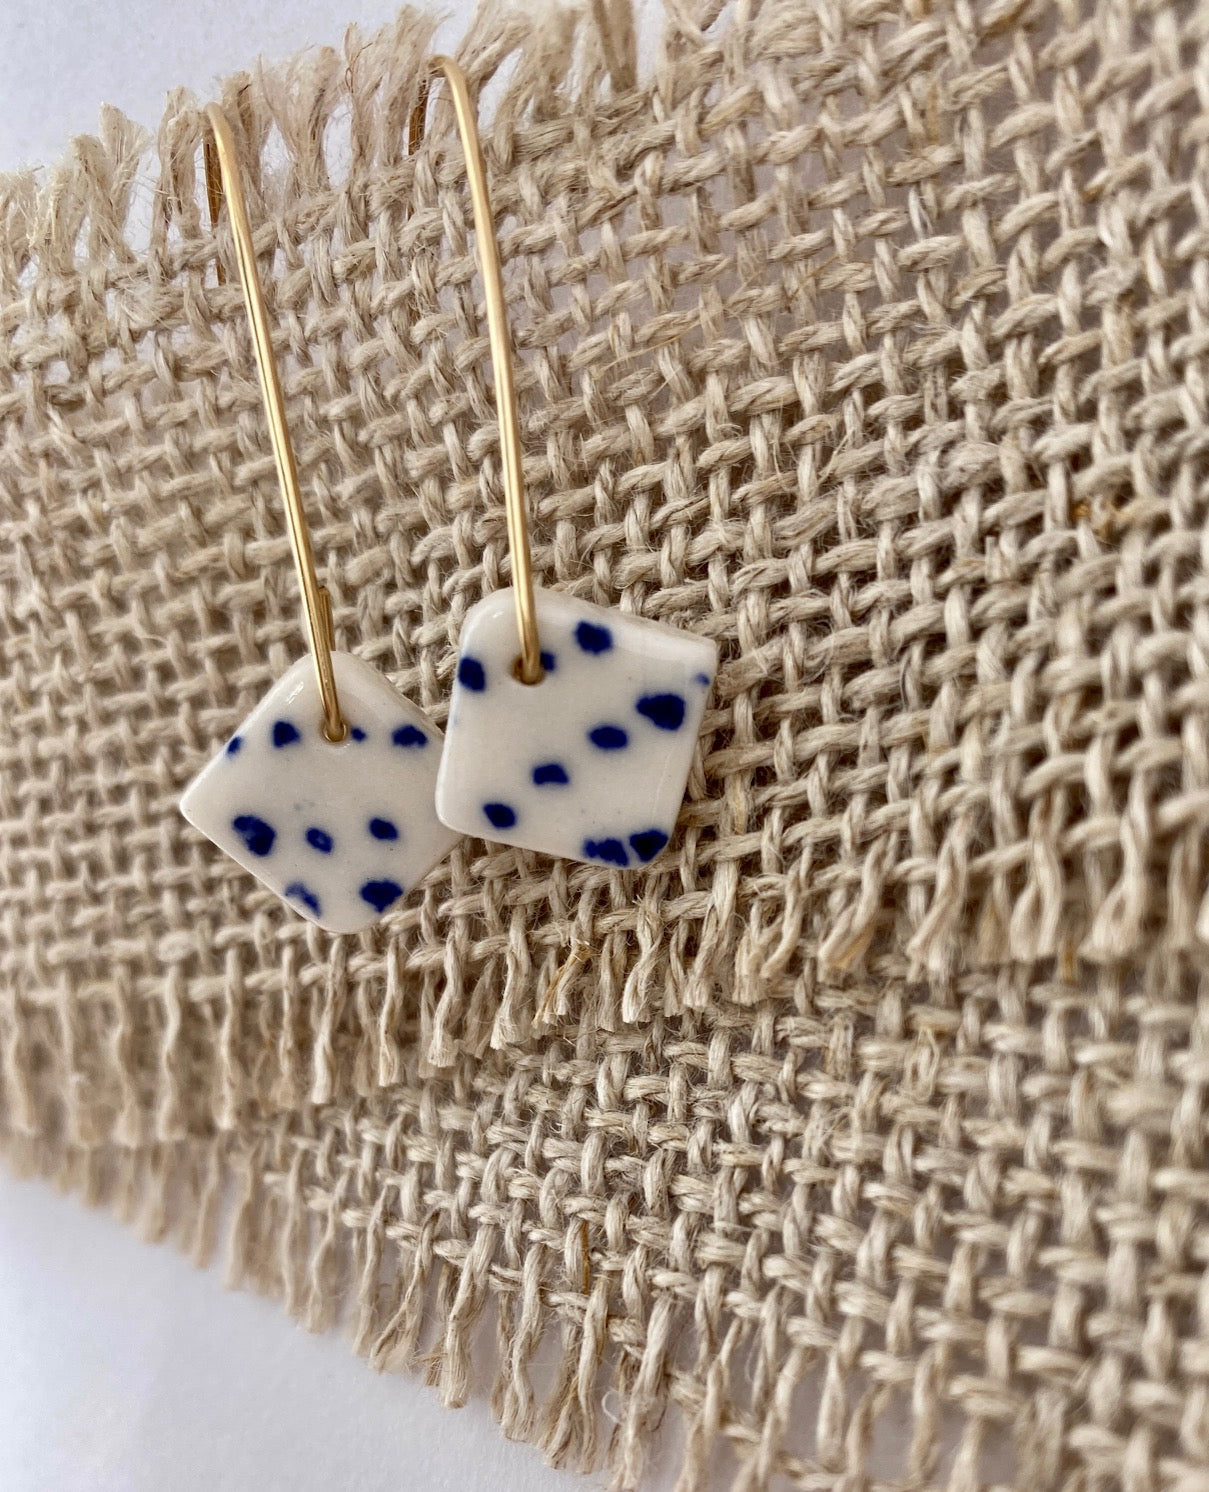 Speckled geometric Porcelain Drop Earring. Blue and White. Delicate